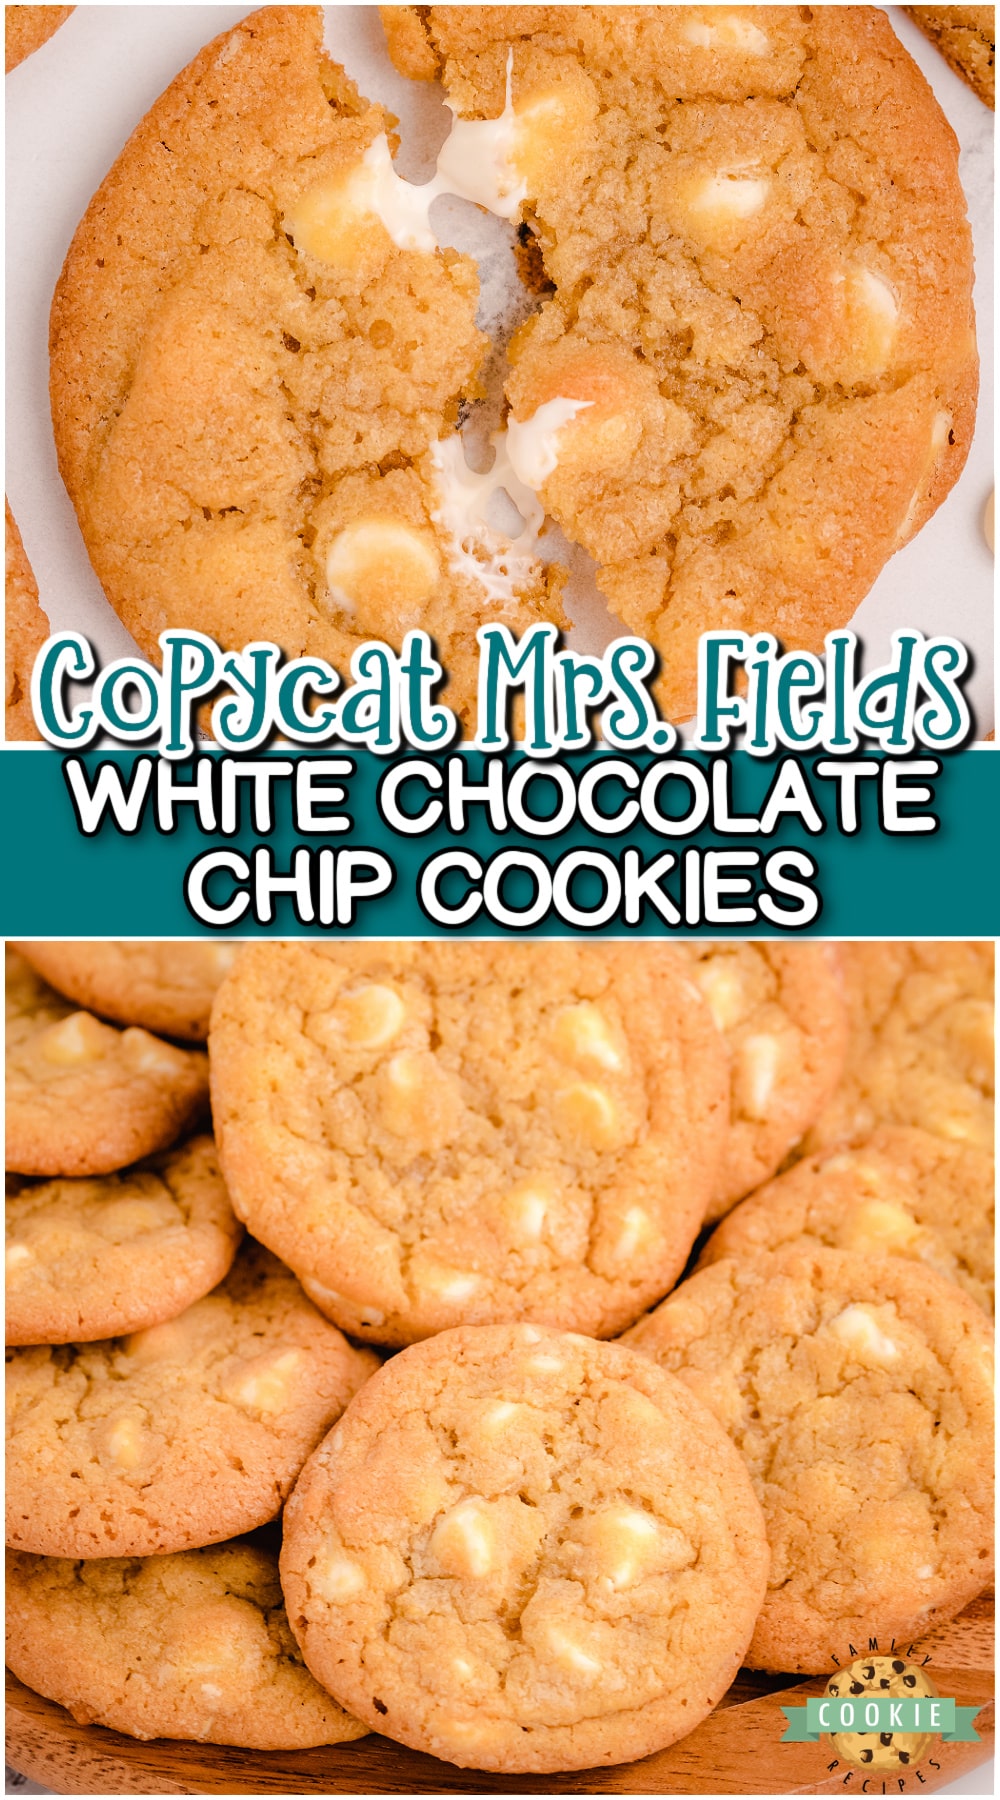 Copycat Mrs. Fields White Chocolate Chip Cookies are soft & buttery cookies packed with white chocolate chips! These incredible white chocolate chip cookies have fantastic flavor, buttery crisp edges & a soft, chewy center. 